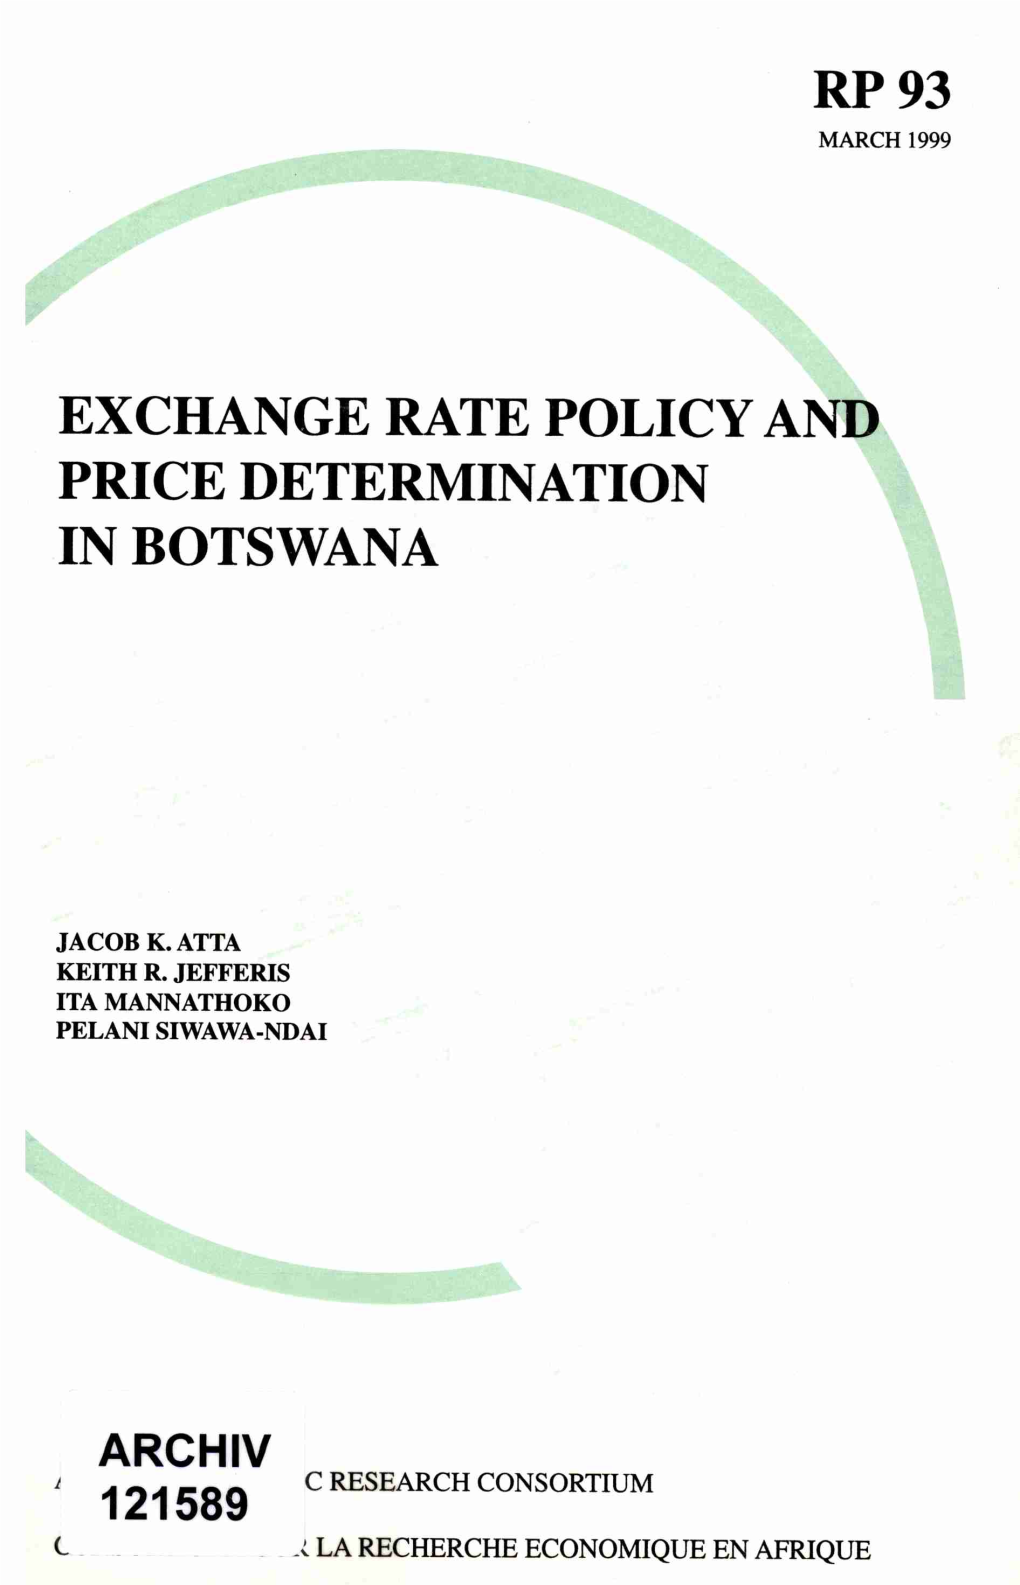 Exchange Rate Policy and Price Determination in Botswana